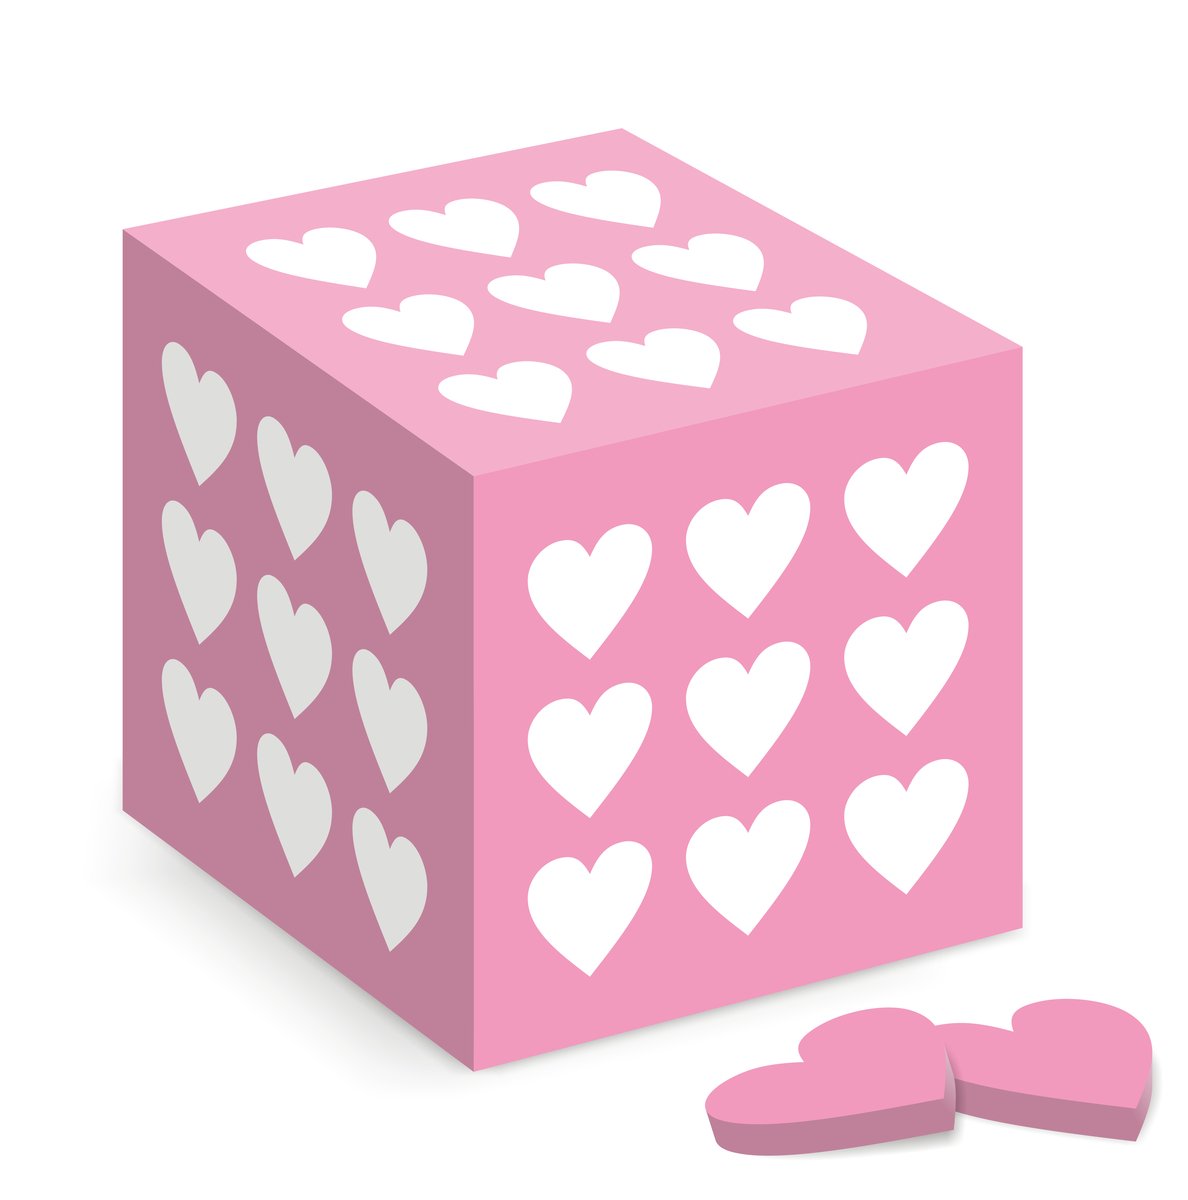 pink dice with white hearts on it